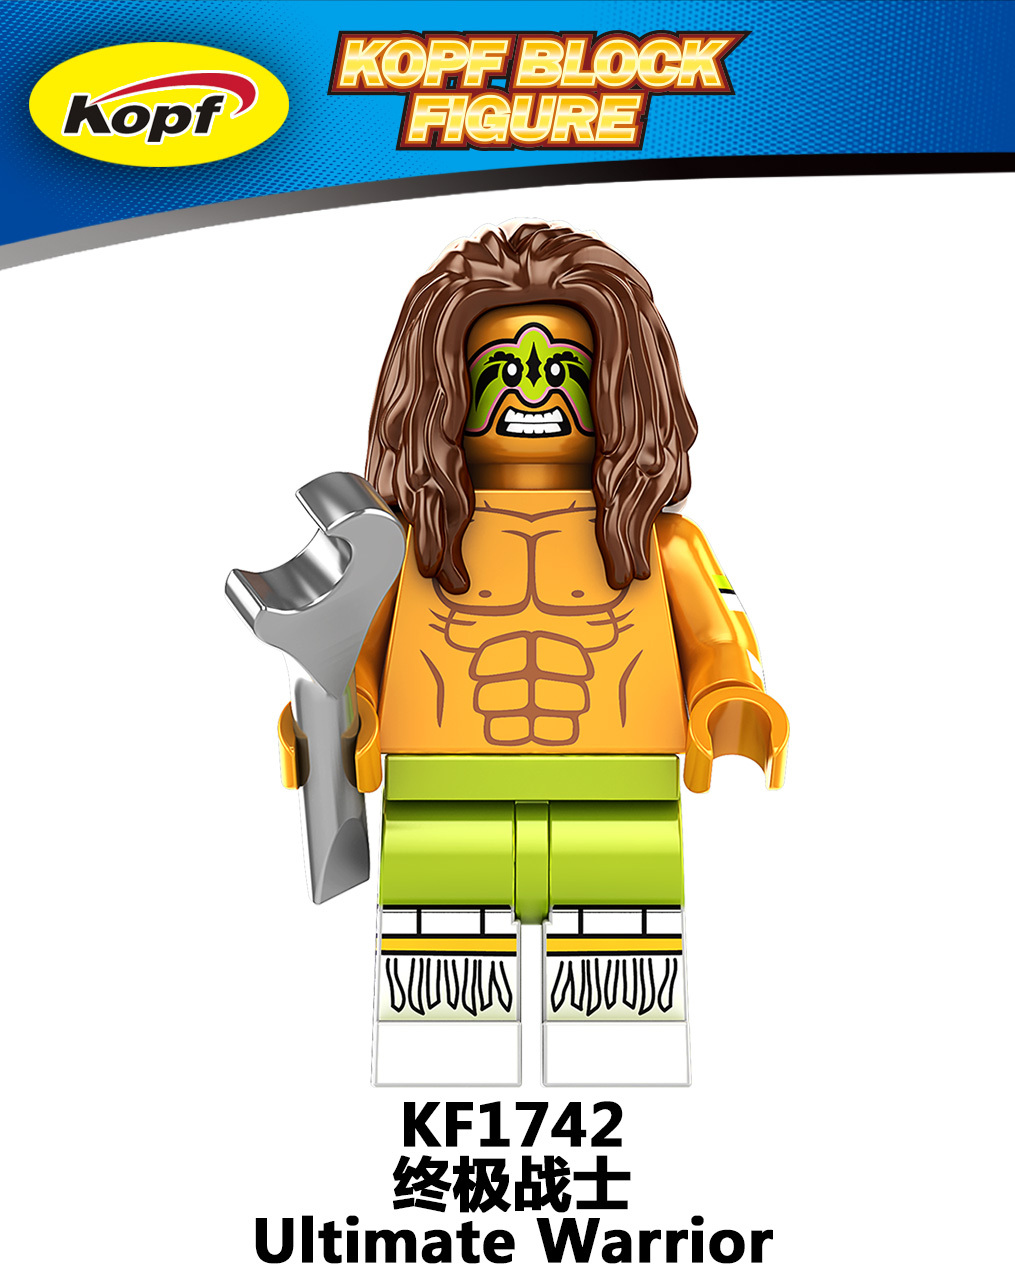 KF6164 KF1736 KF1737 KF1738 KF1739 KF1740 KF1741 KF1742 KF1743 Wrestling Superstar Movie Series Mini Building Blocks  Action Figures Educational Toys For Kids Gifts